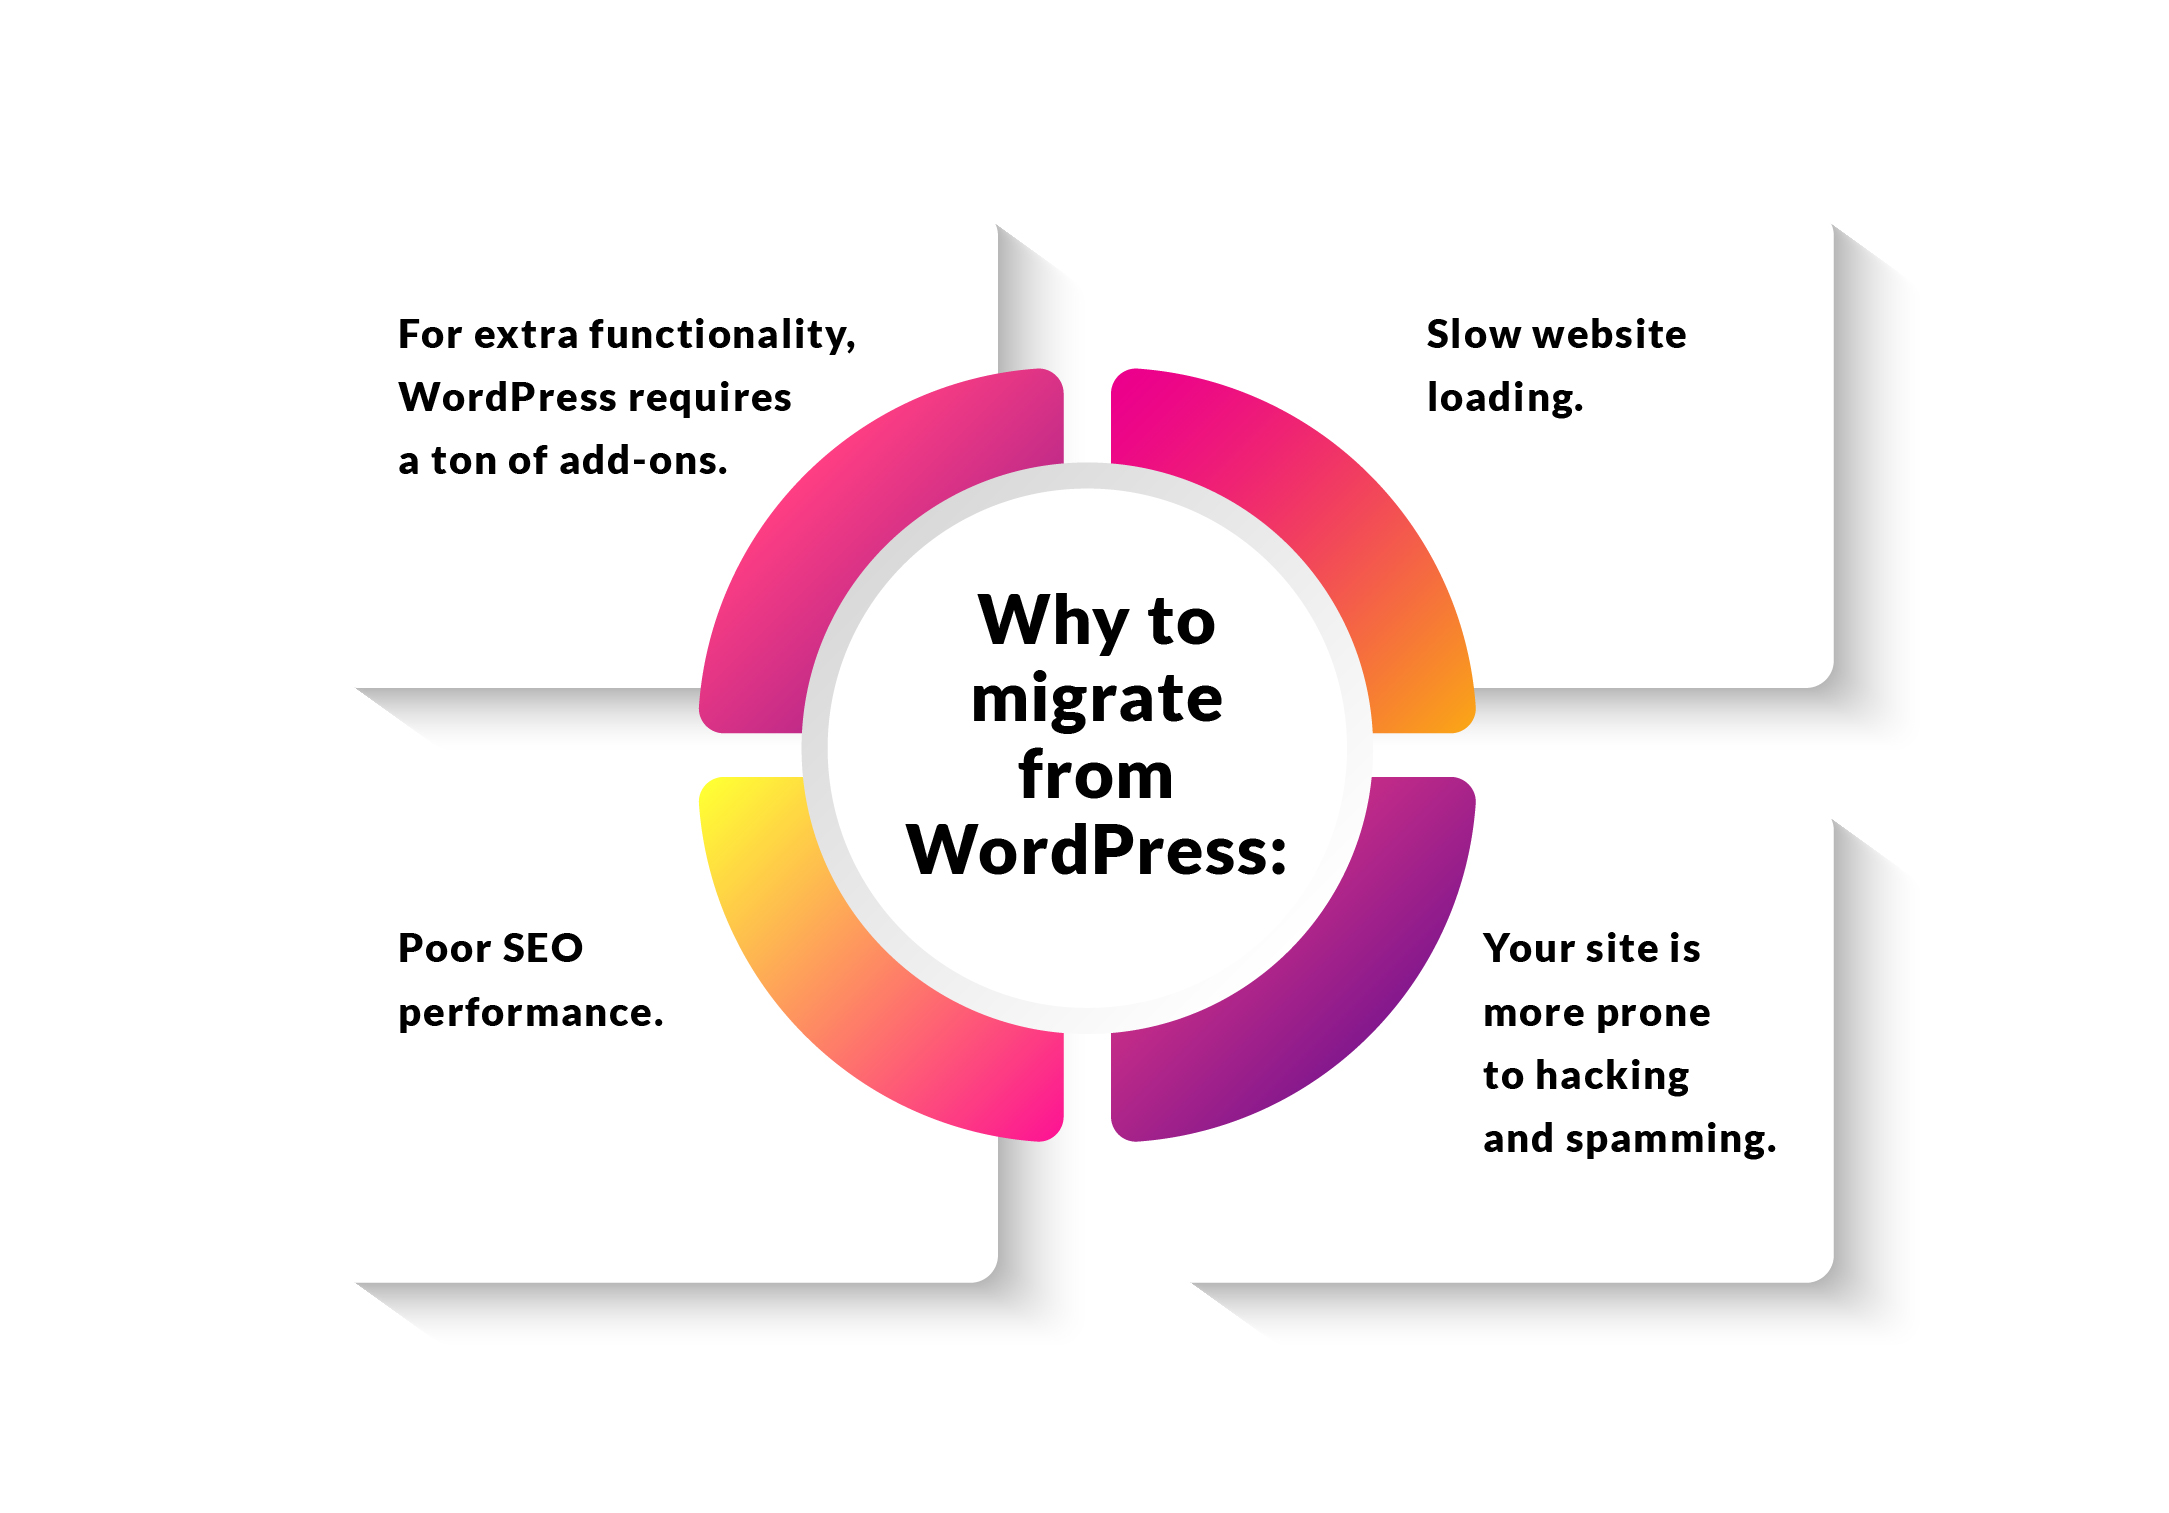 Why to migrate from WordPress